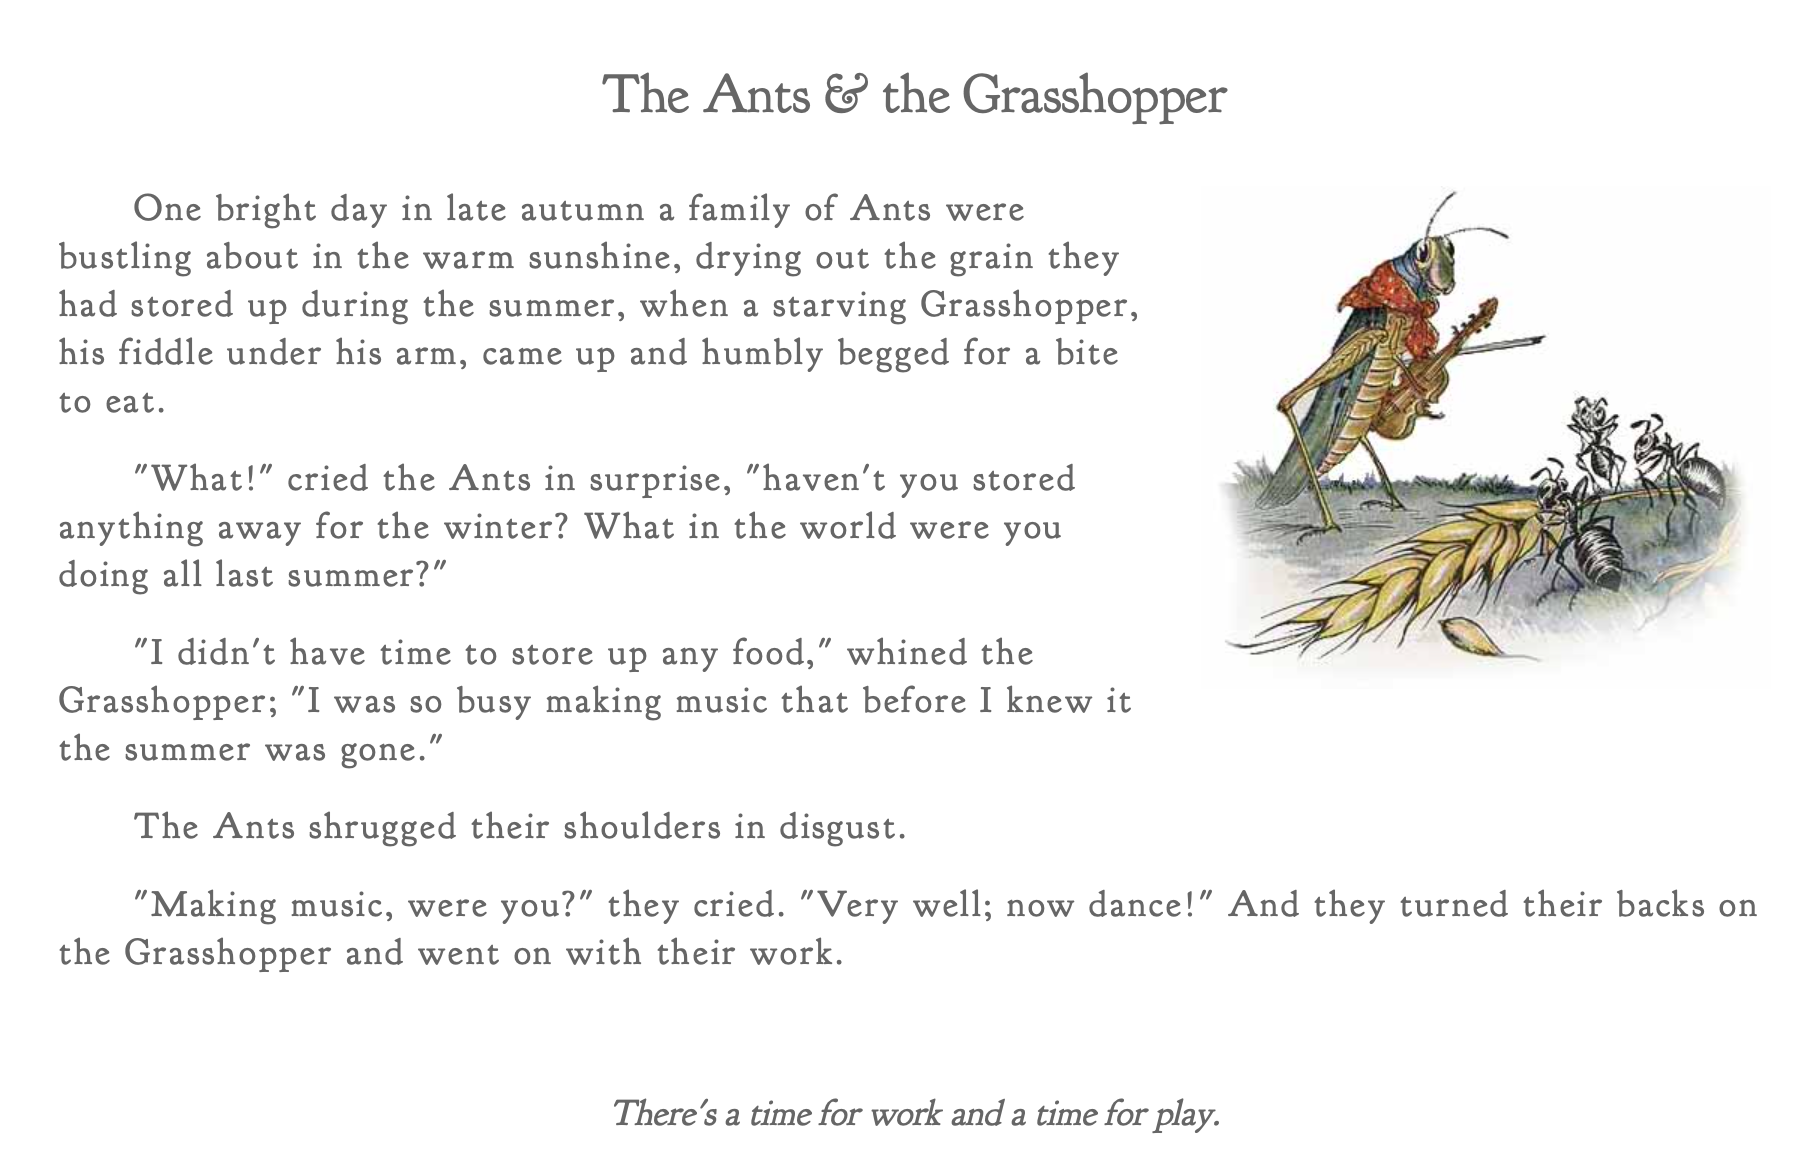 Fable of The Ants & The Grasshopper